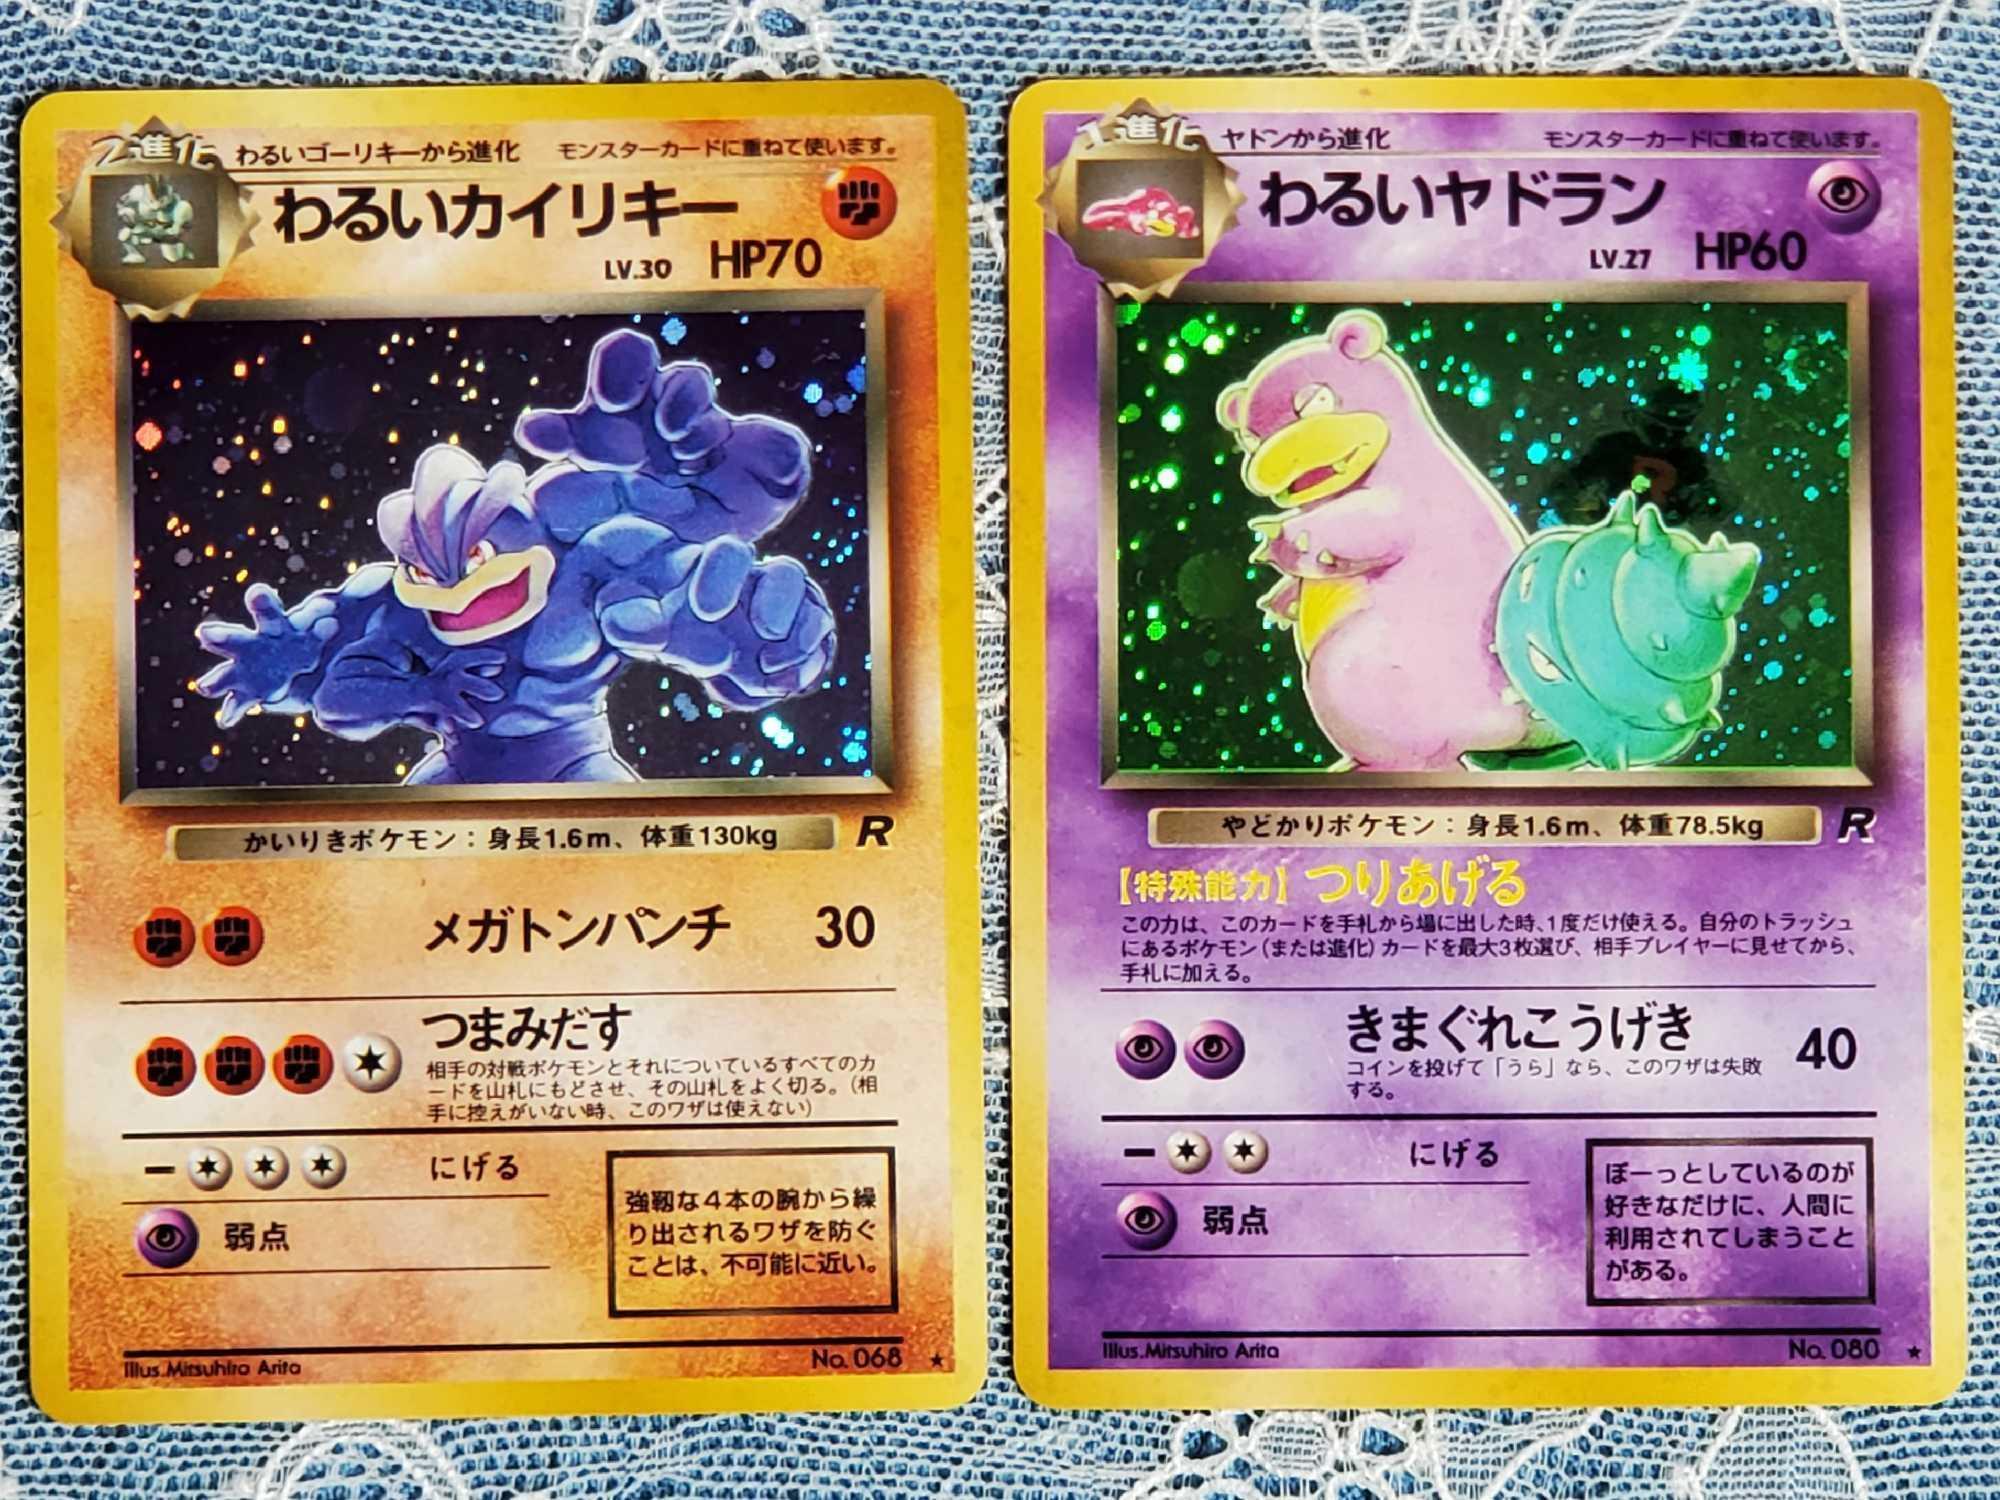 20 Pokemon Pocket Monster Fossil and Team Rocket Series Rare Holo Cards